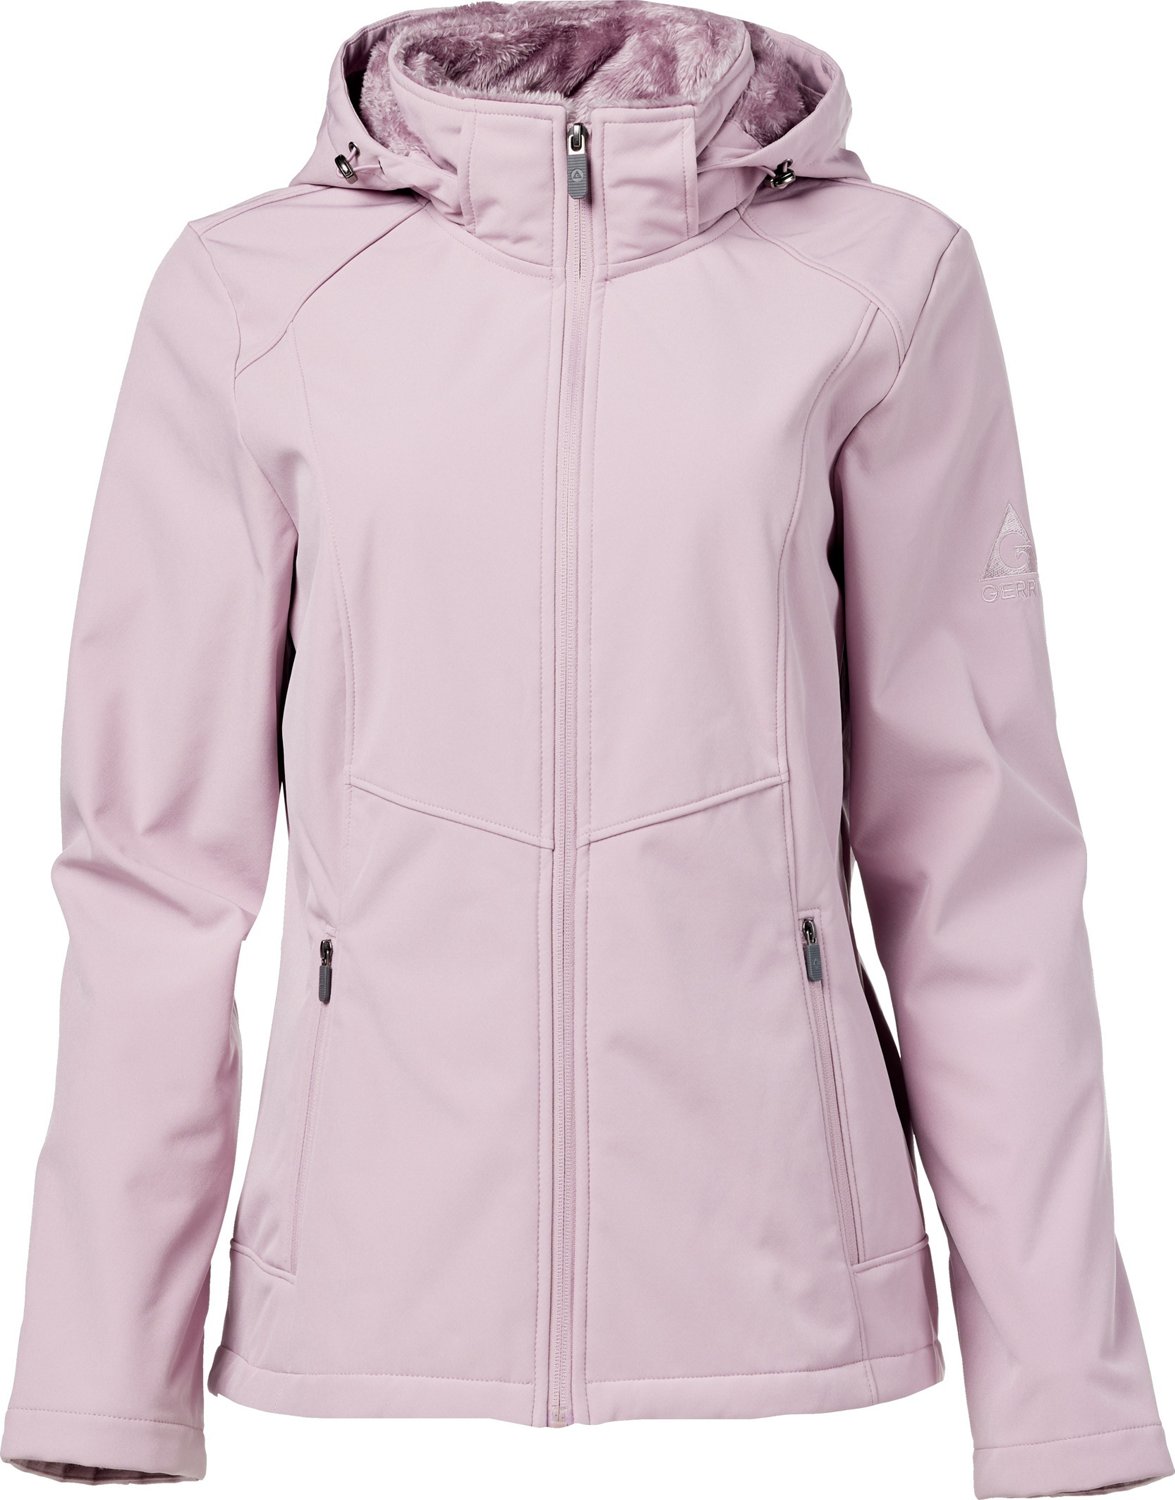 Gerry Women's Lilly Softshell Jacket | Free Shipping at Academy